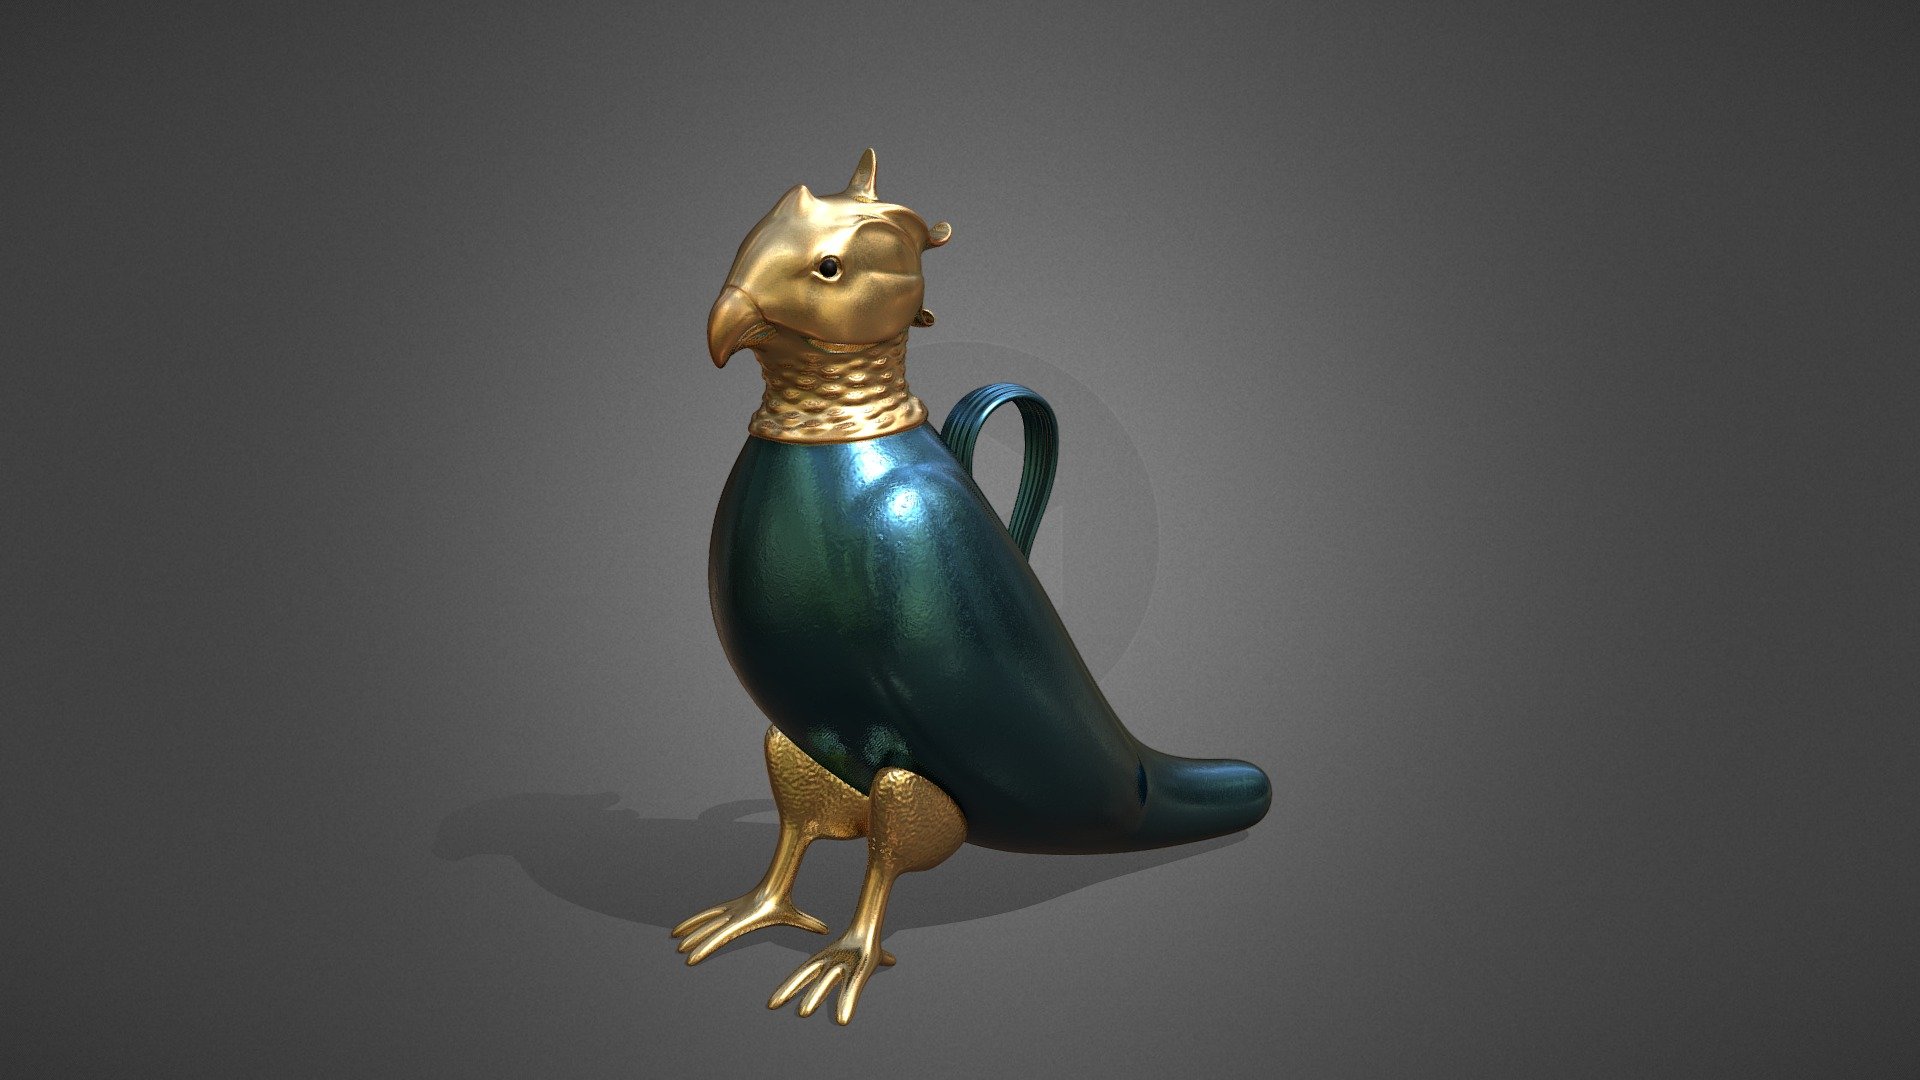 Modeled in blender and textured in substance 3D painter 3d model